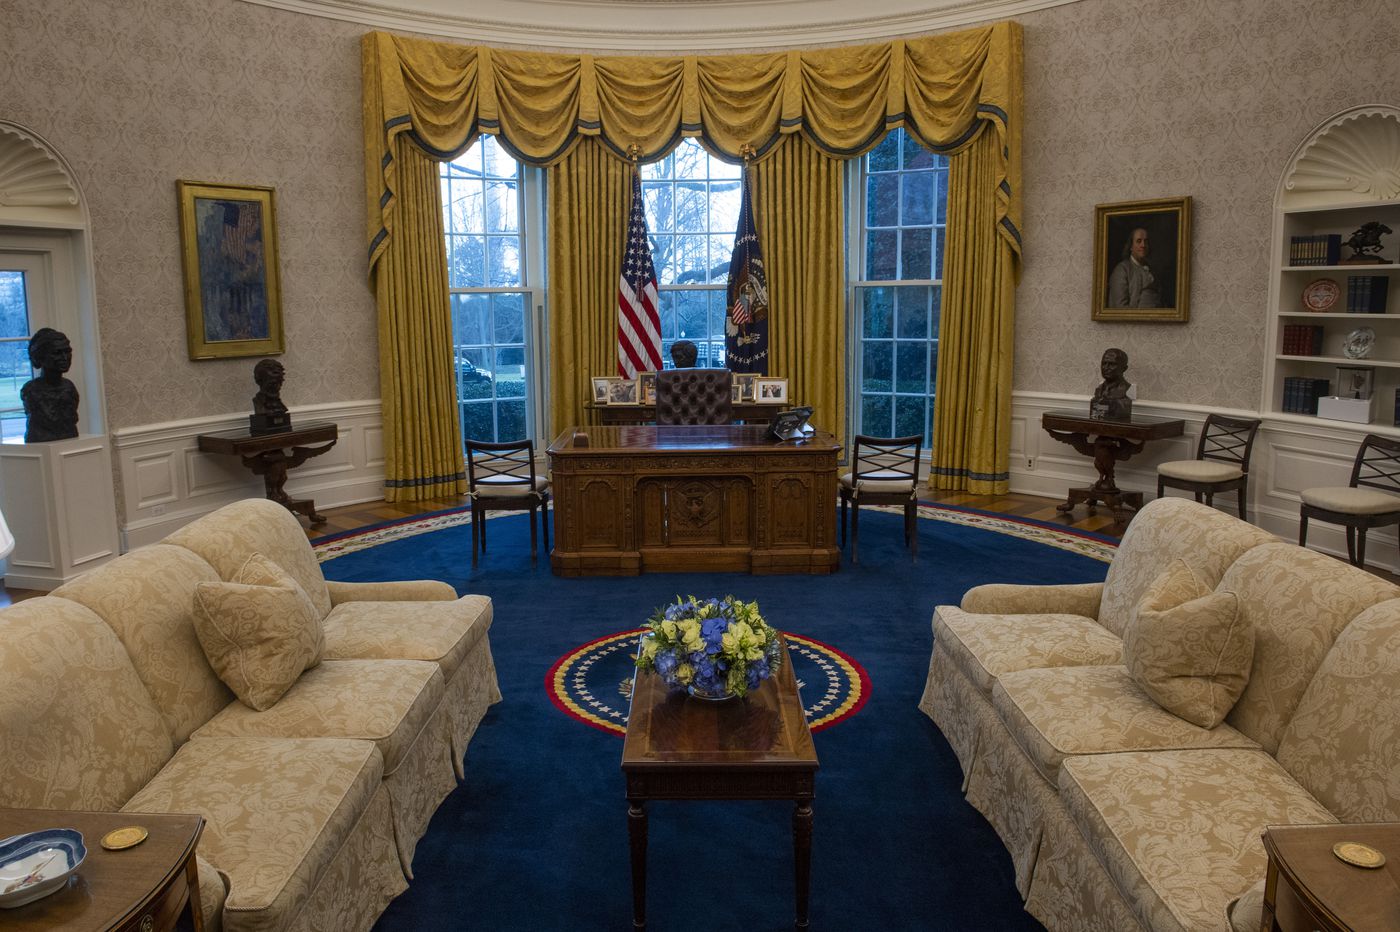 What the White House and Oval Office Look Like After Renovations ...